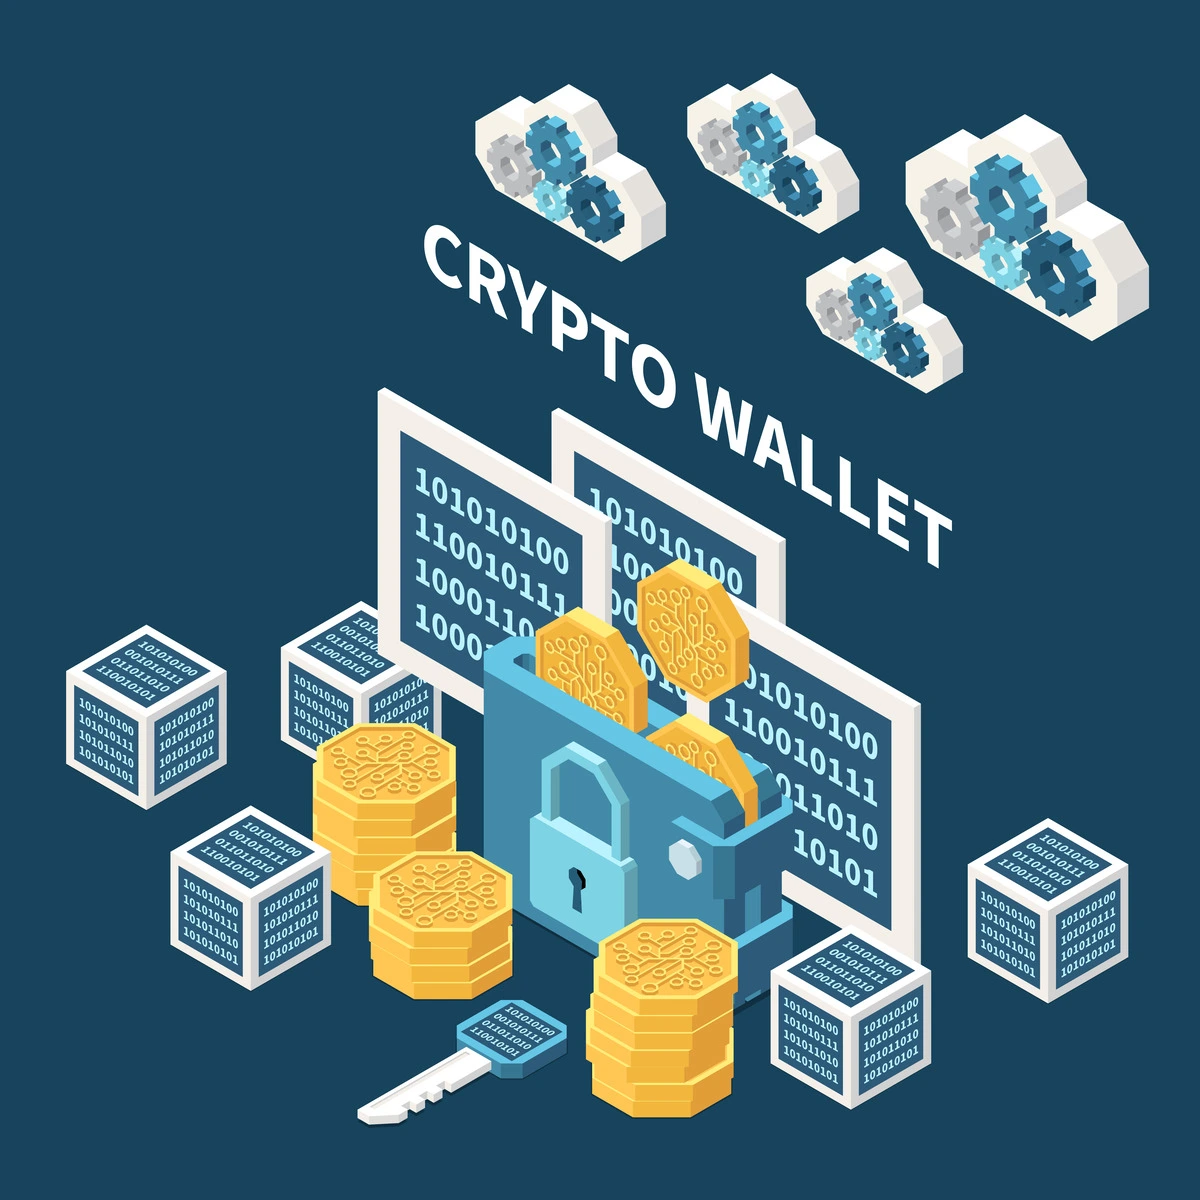 CRYPTOCURRENCIES AND SECURE WALLETS